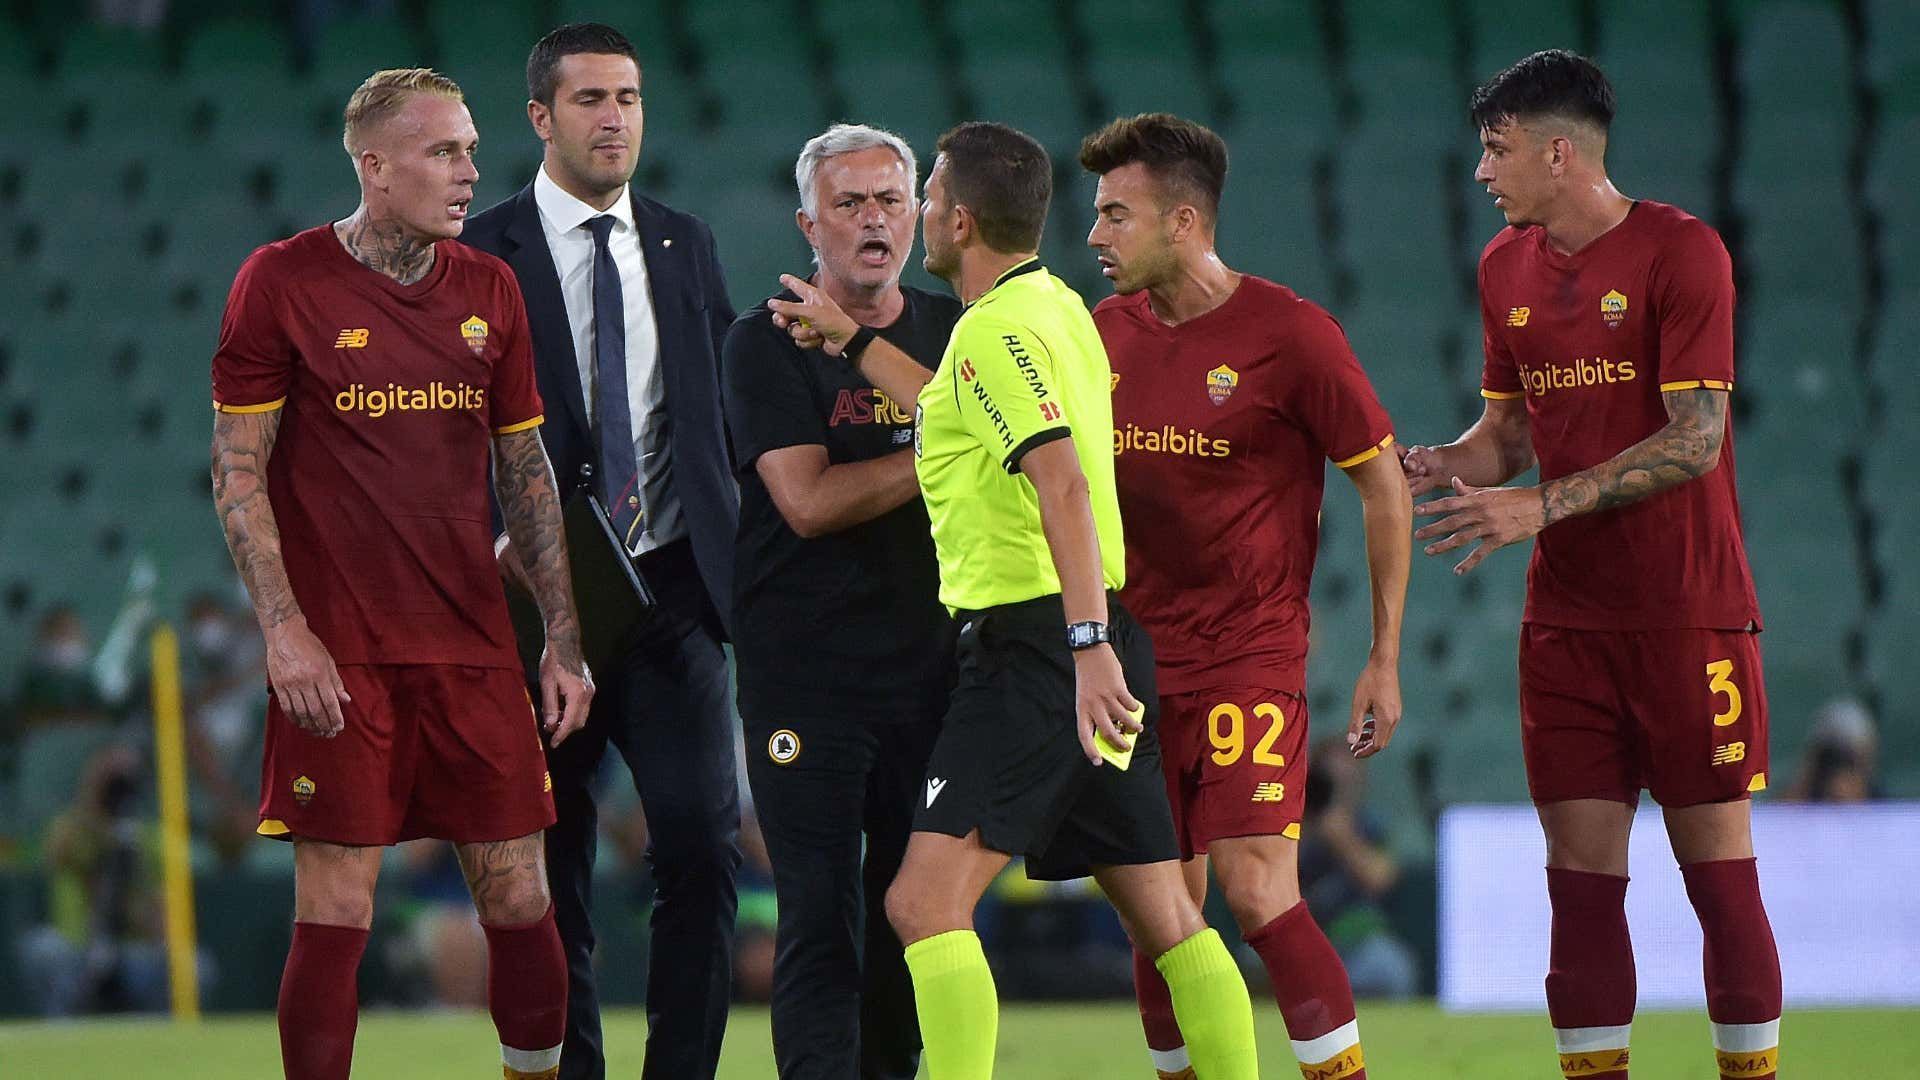 Jose Mourinho before being sent off in a friendly (Image via Getty)